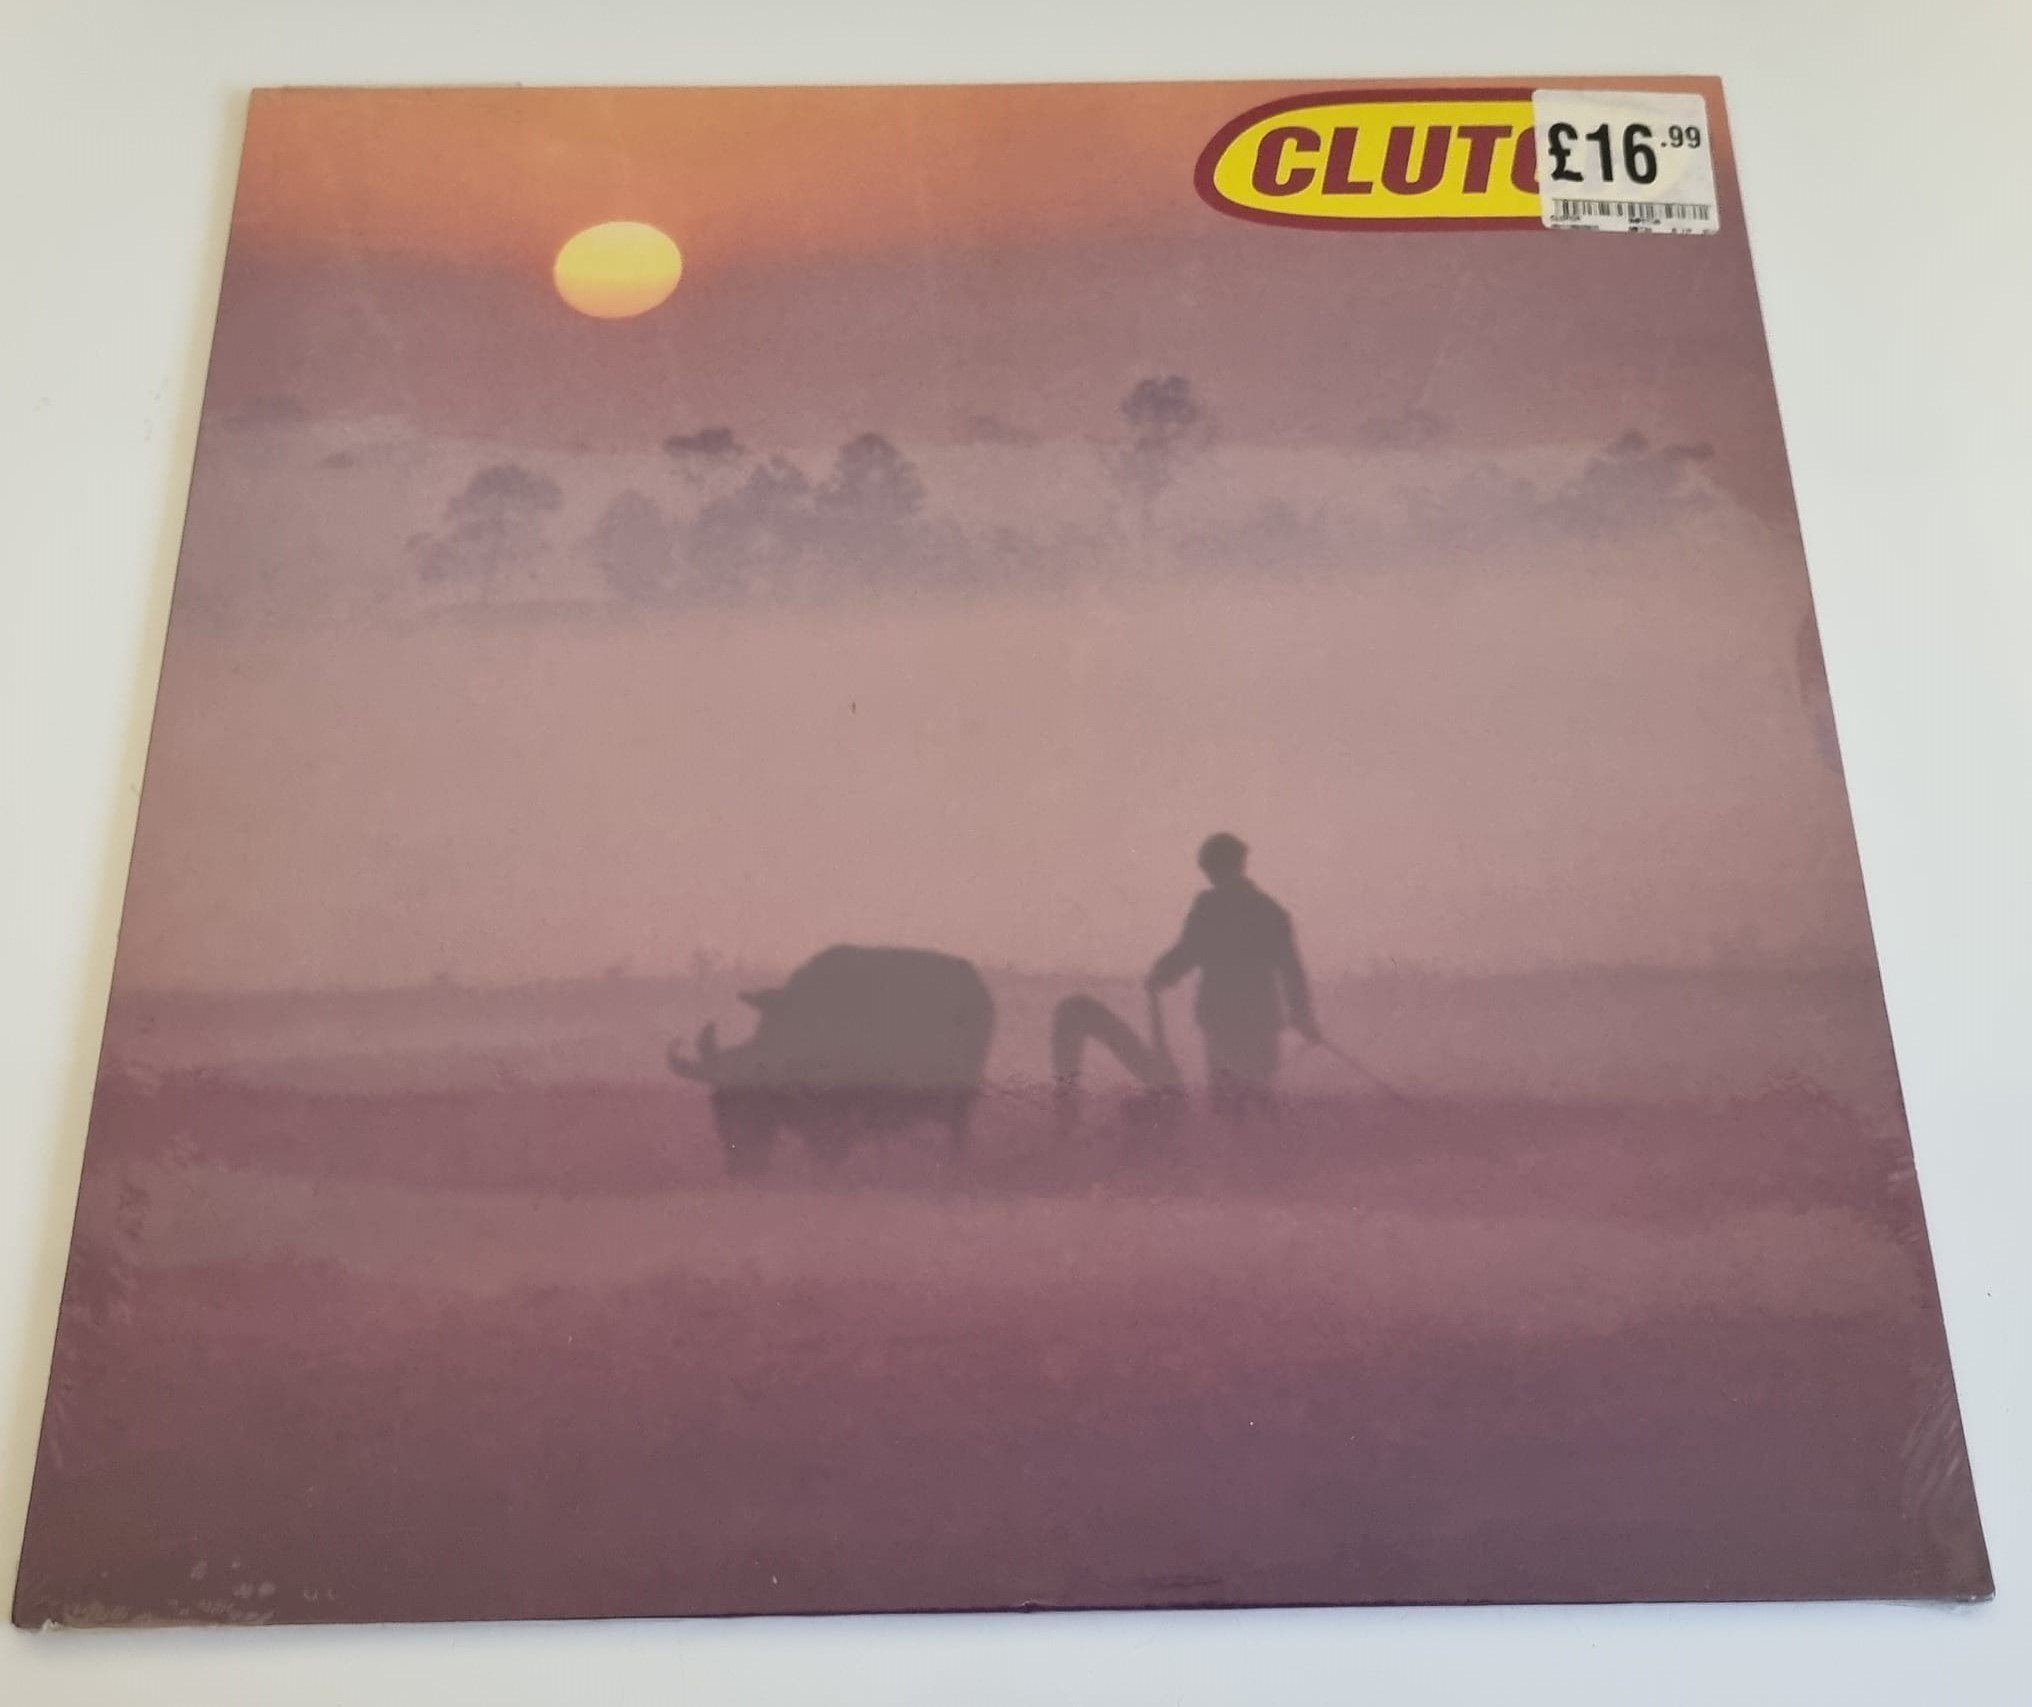 Buy this rare Clutch record by clicking here